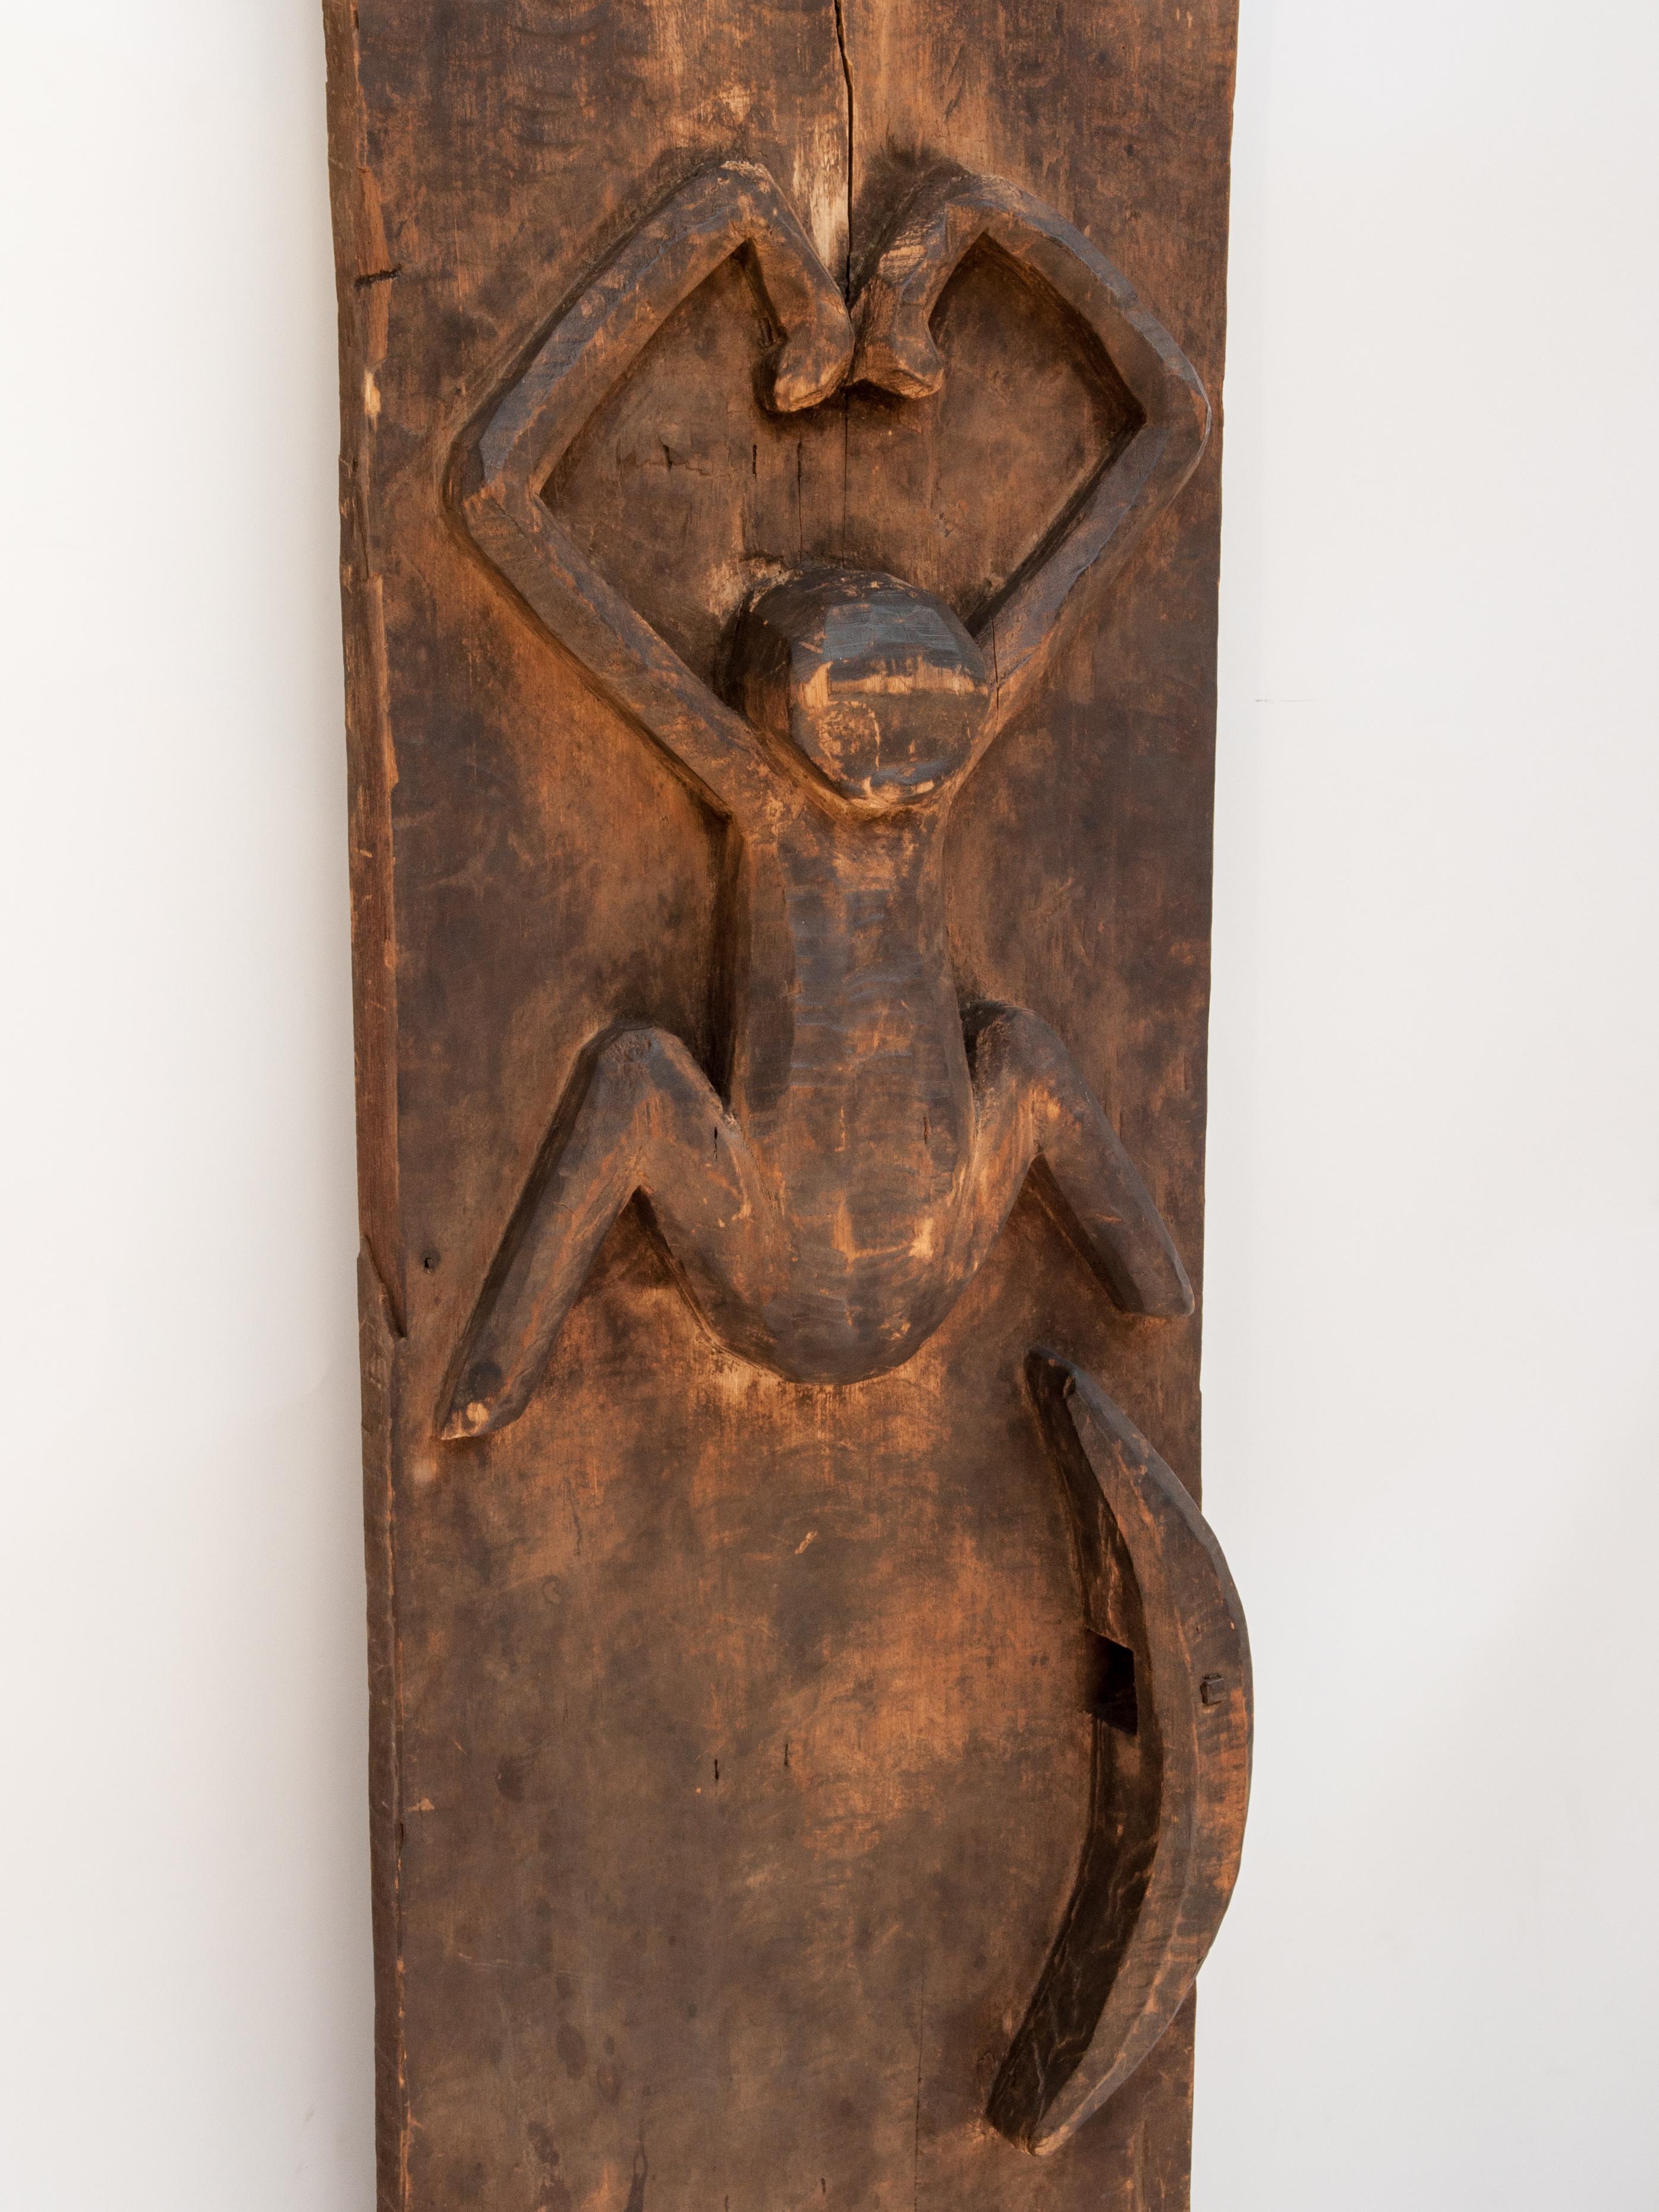 Carved tribal door panel, gibbon motif. From the Mentawai Islands, Indonesia, mid-20th century.
The Bilou gibbon is an centrally important motif often encountered in Mentawai art, and is here depicted in a typically graceful and symmetrical manner.